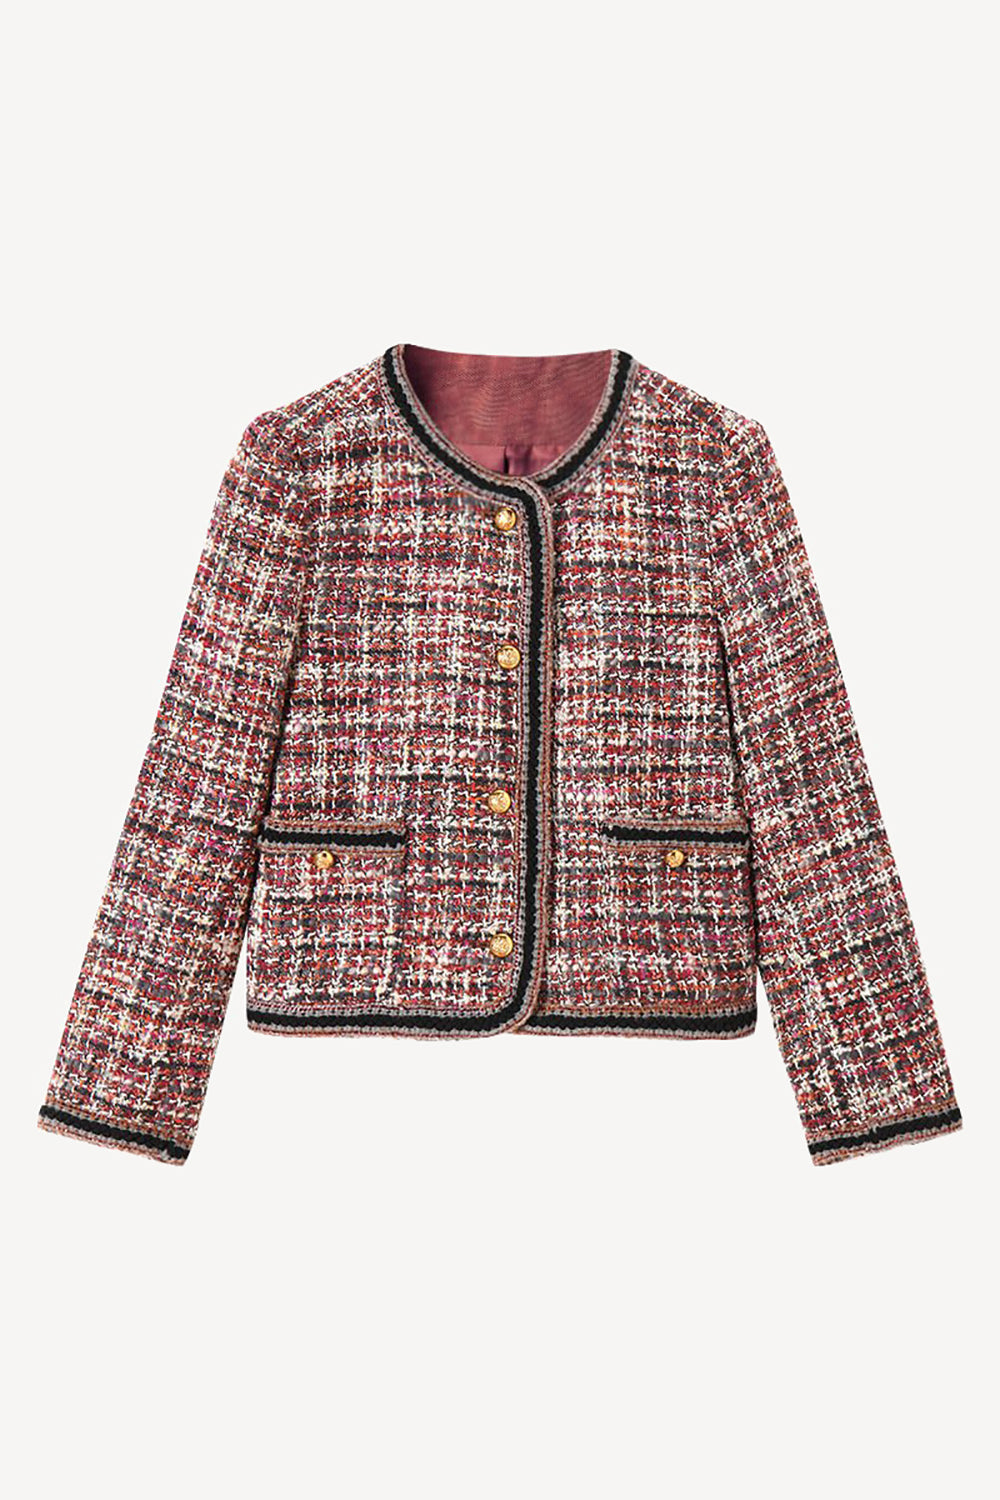 Red Tweed Plaid Cropped Open Front Women Jacket